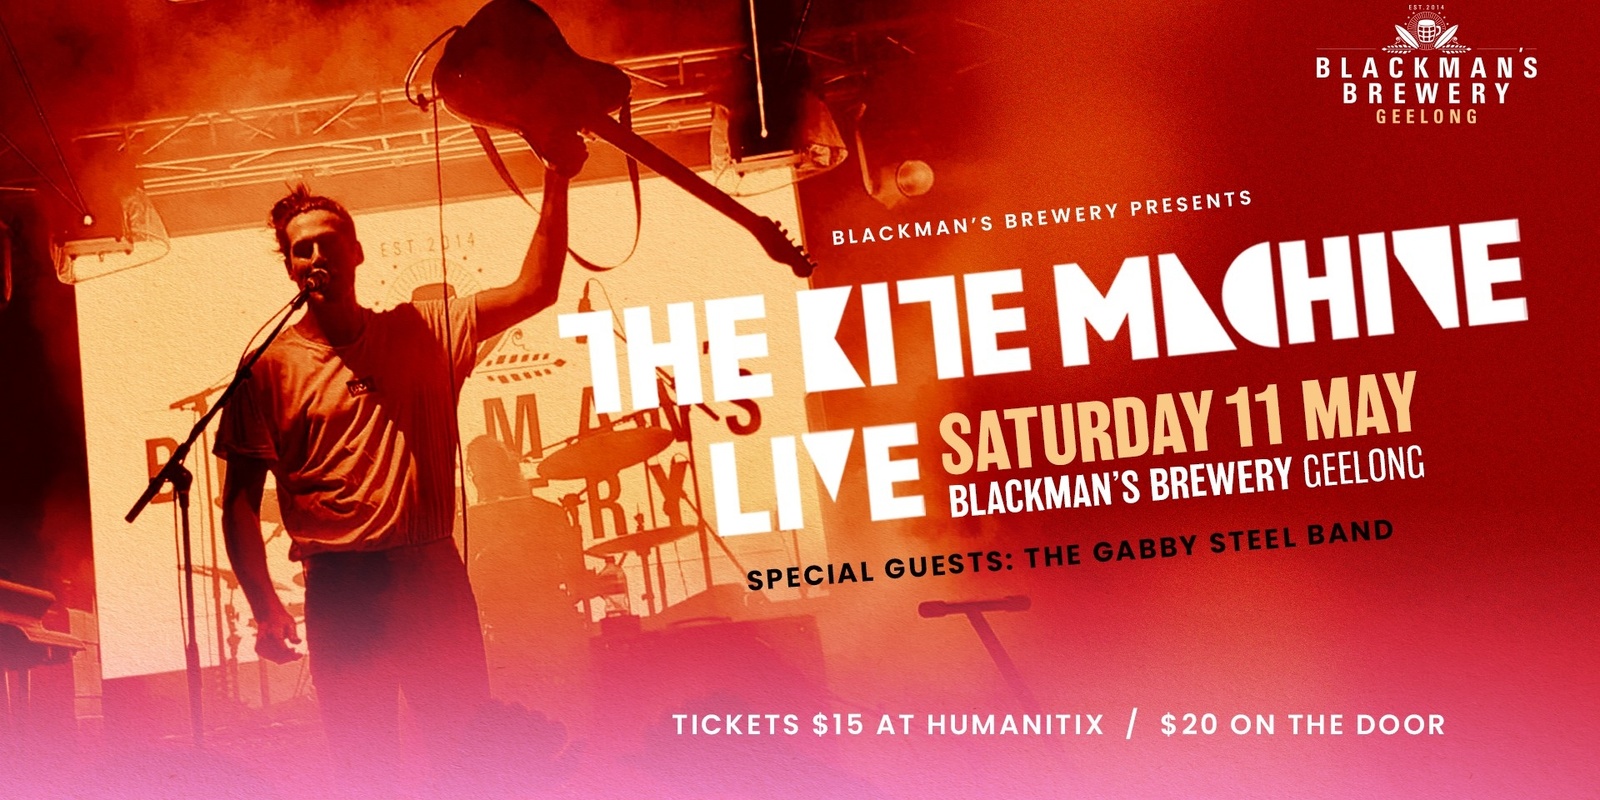 Banner image for The Kite Machine at Blackman's Brewery, Geelong